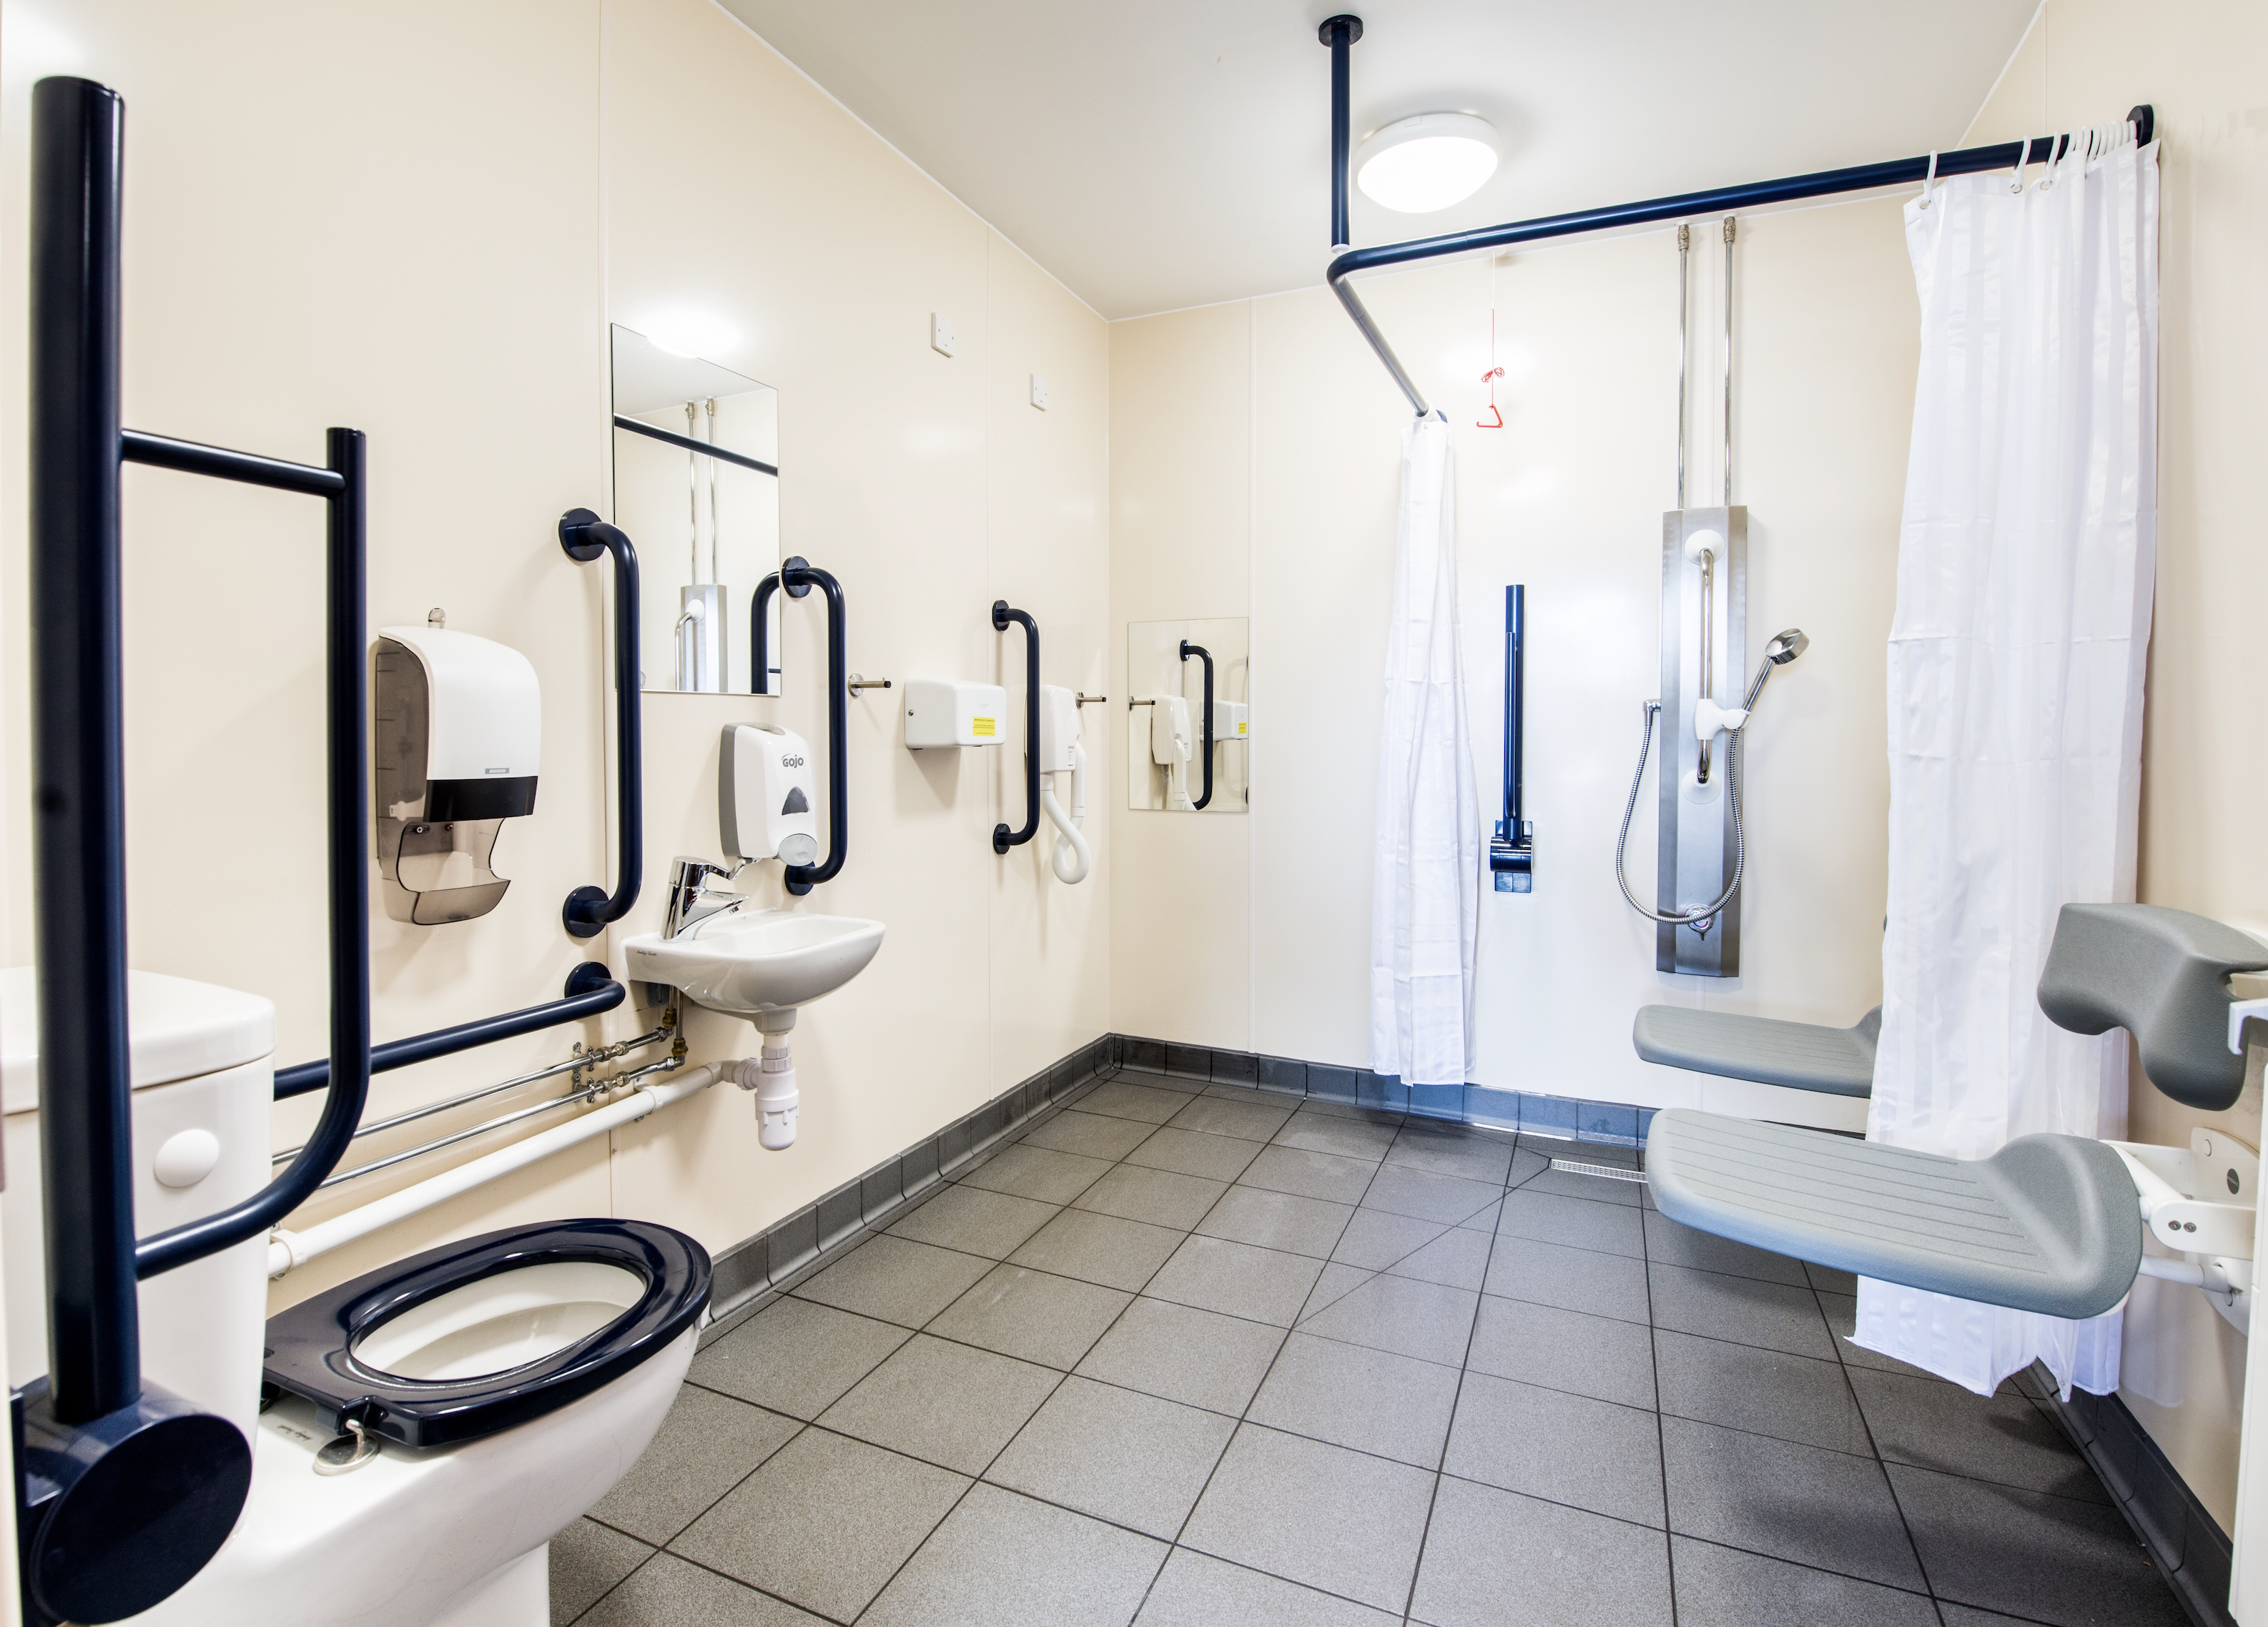 What is Light Reflective Value (LRV) and its importance in washroom design?